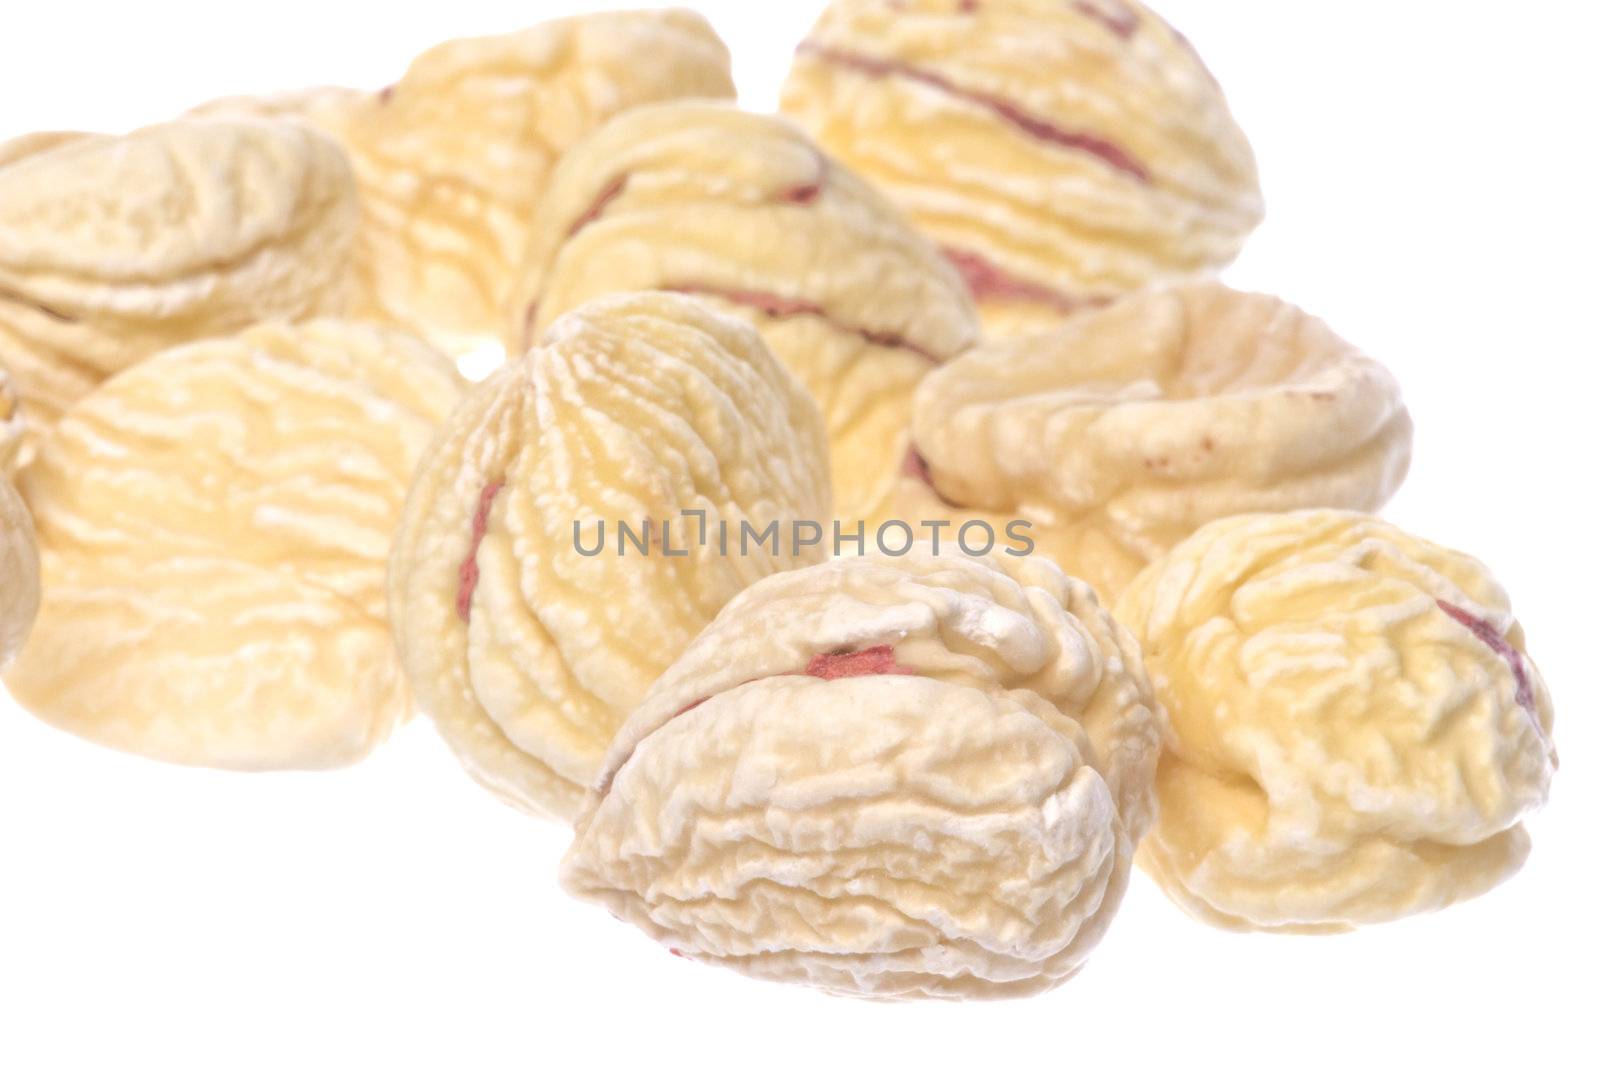 Isolated macro image of dried chestnuts.